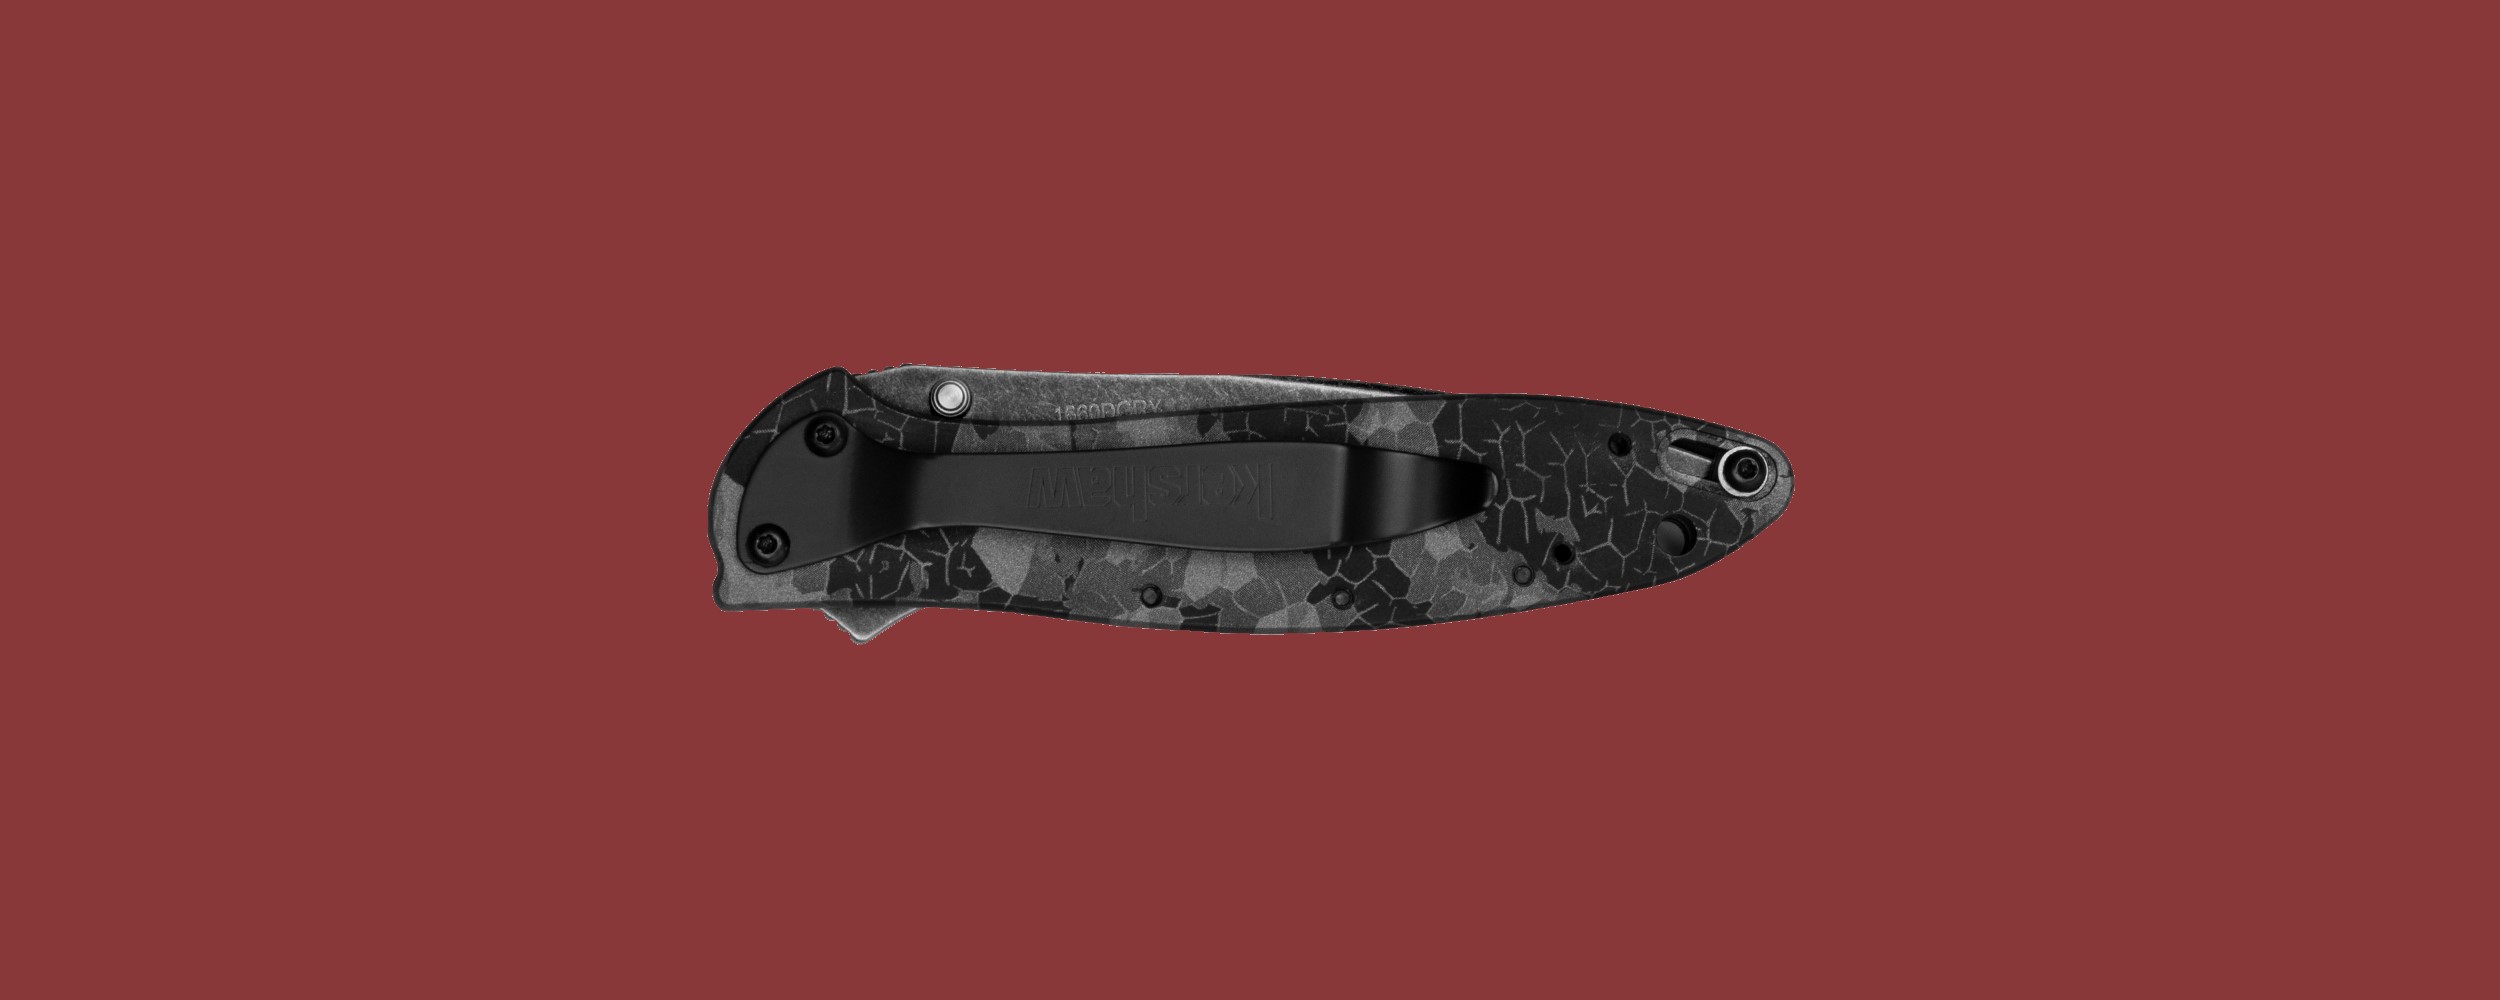 New Kershaw Factory Special is Fresh Version of the Legendary Leek